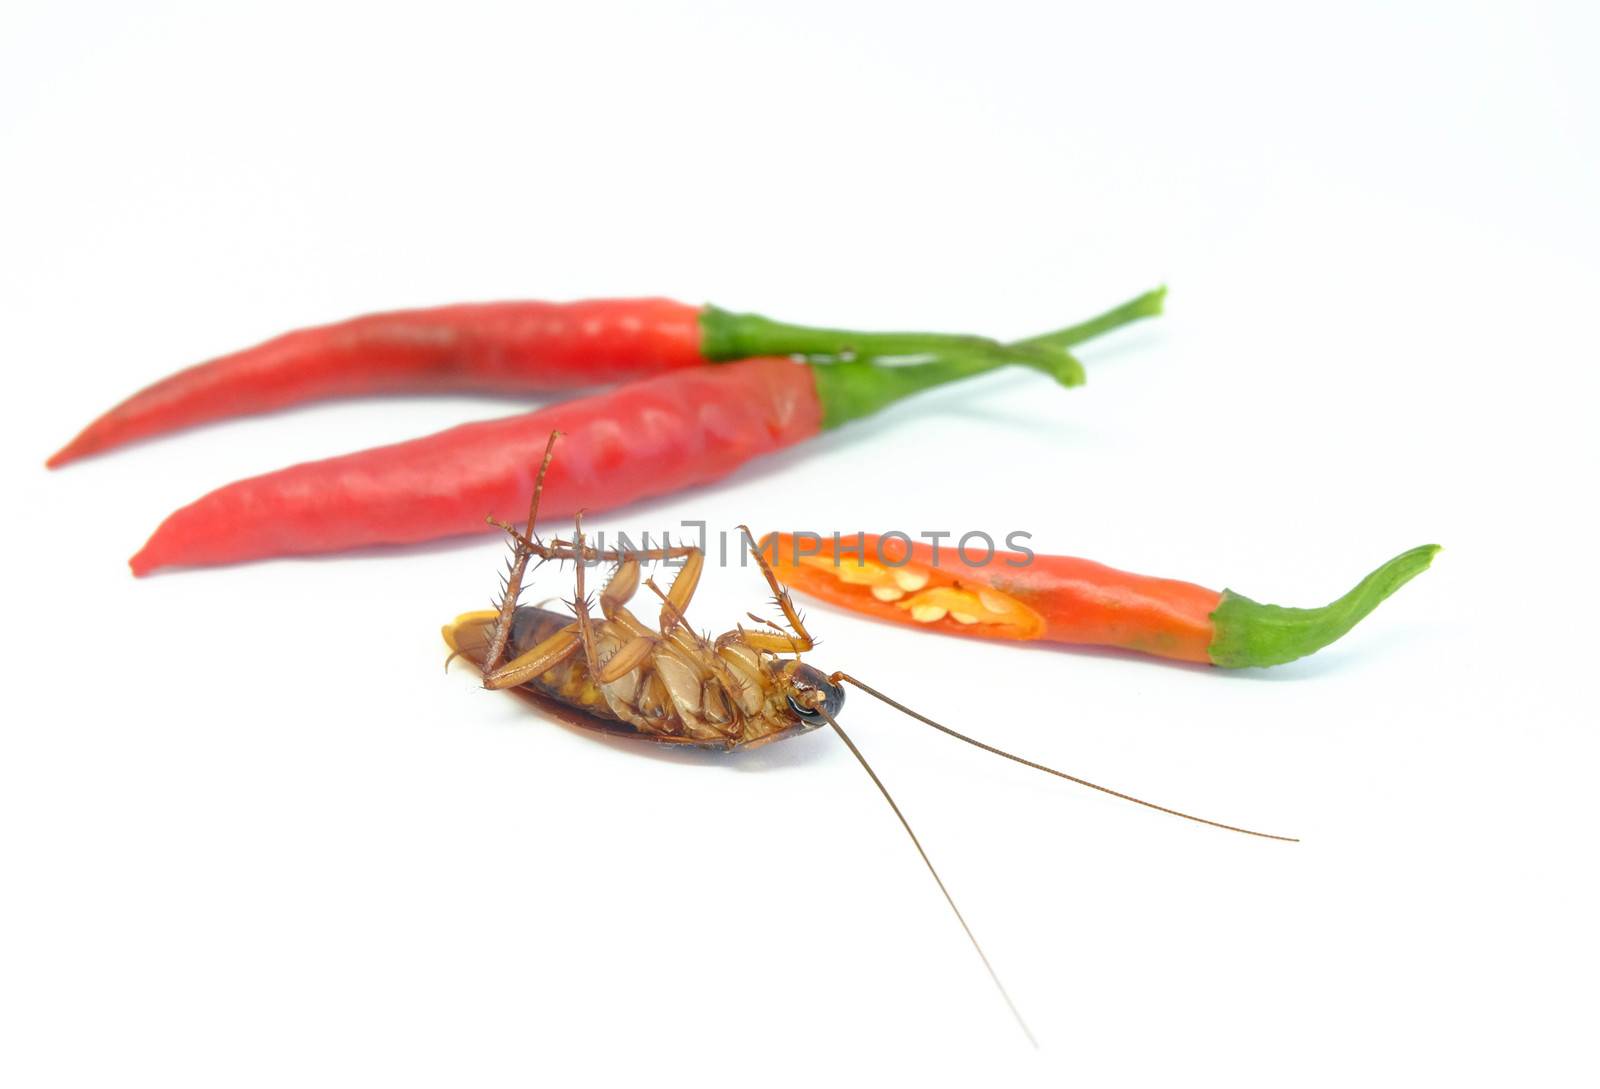 A chili can chase cockroaches,Close up cockroach chili on isolat by e22xua